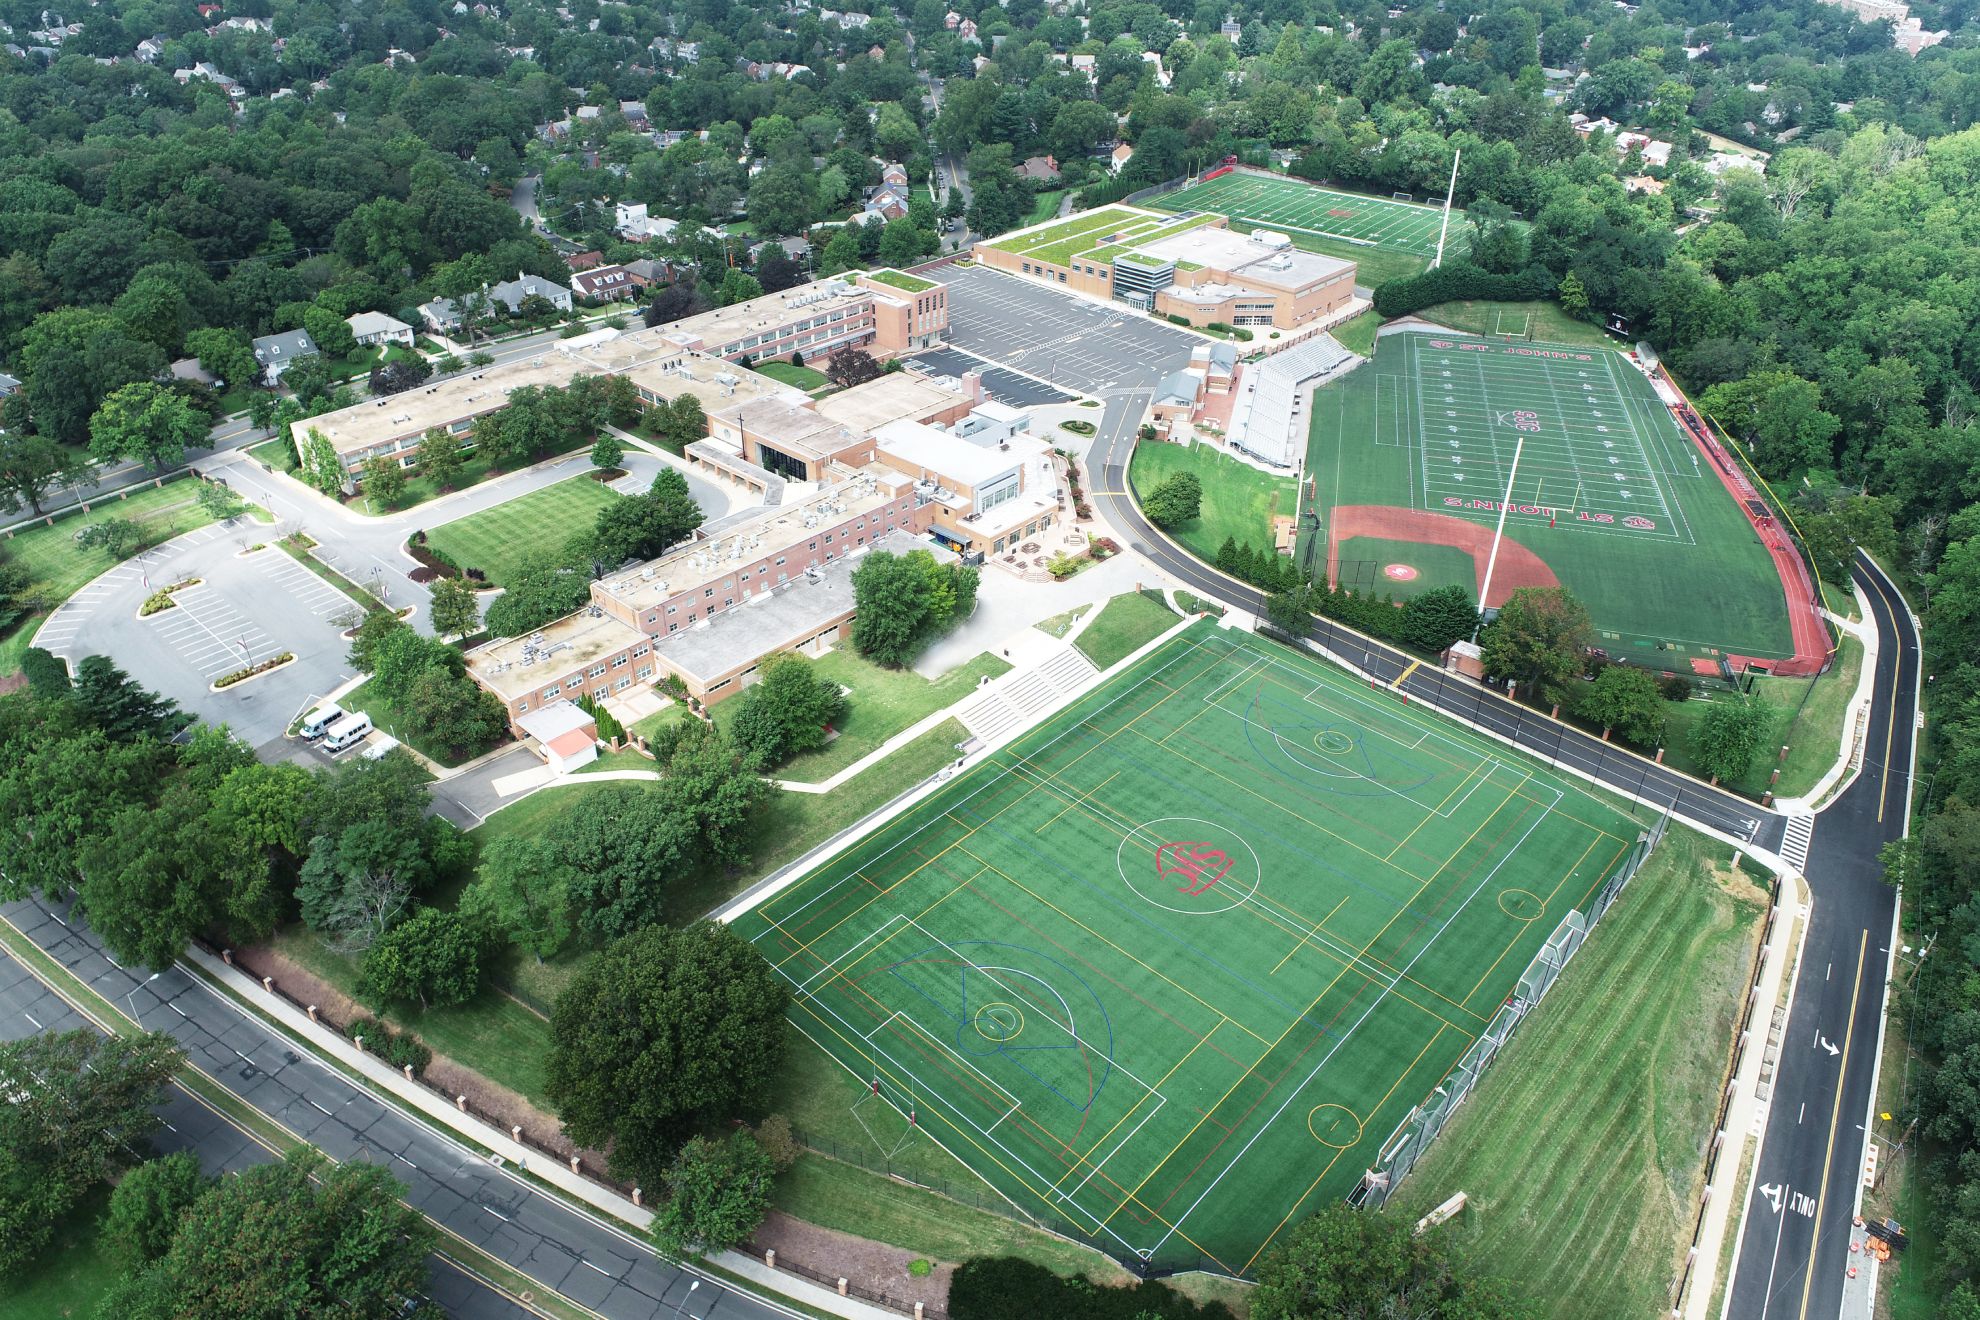 Aerial view of athletics fields